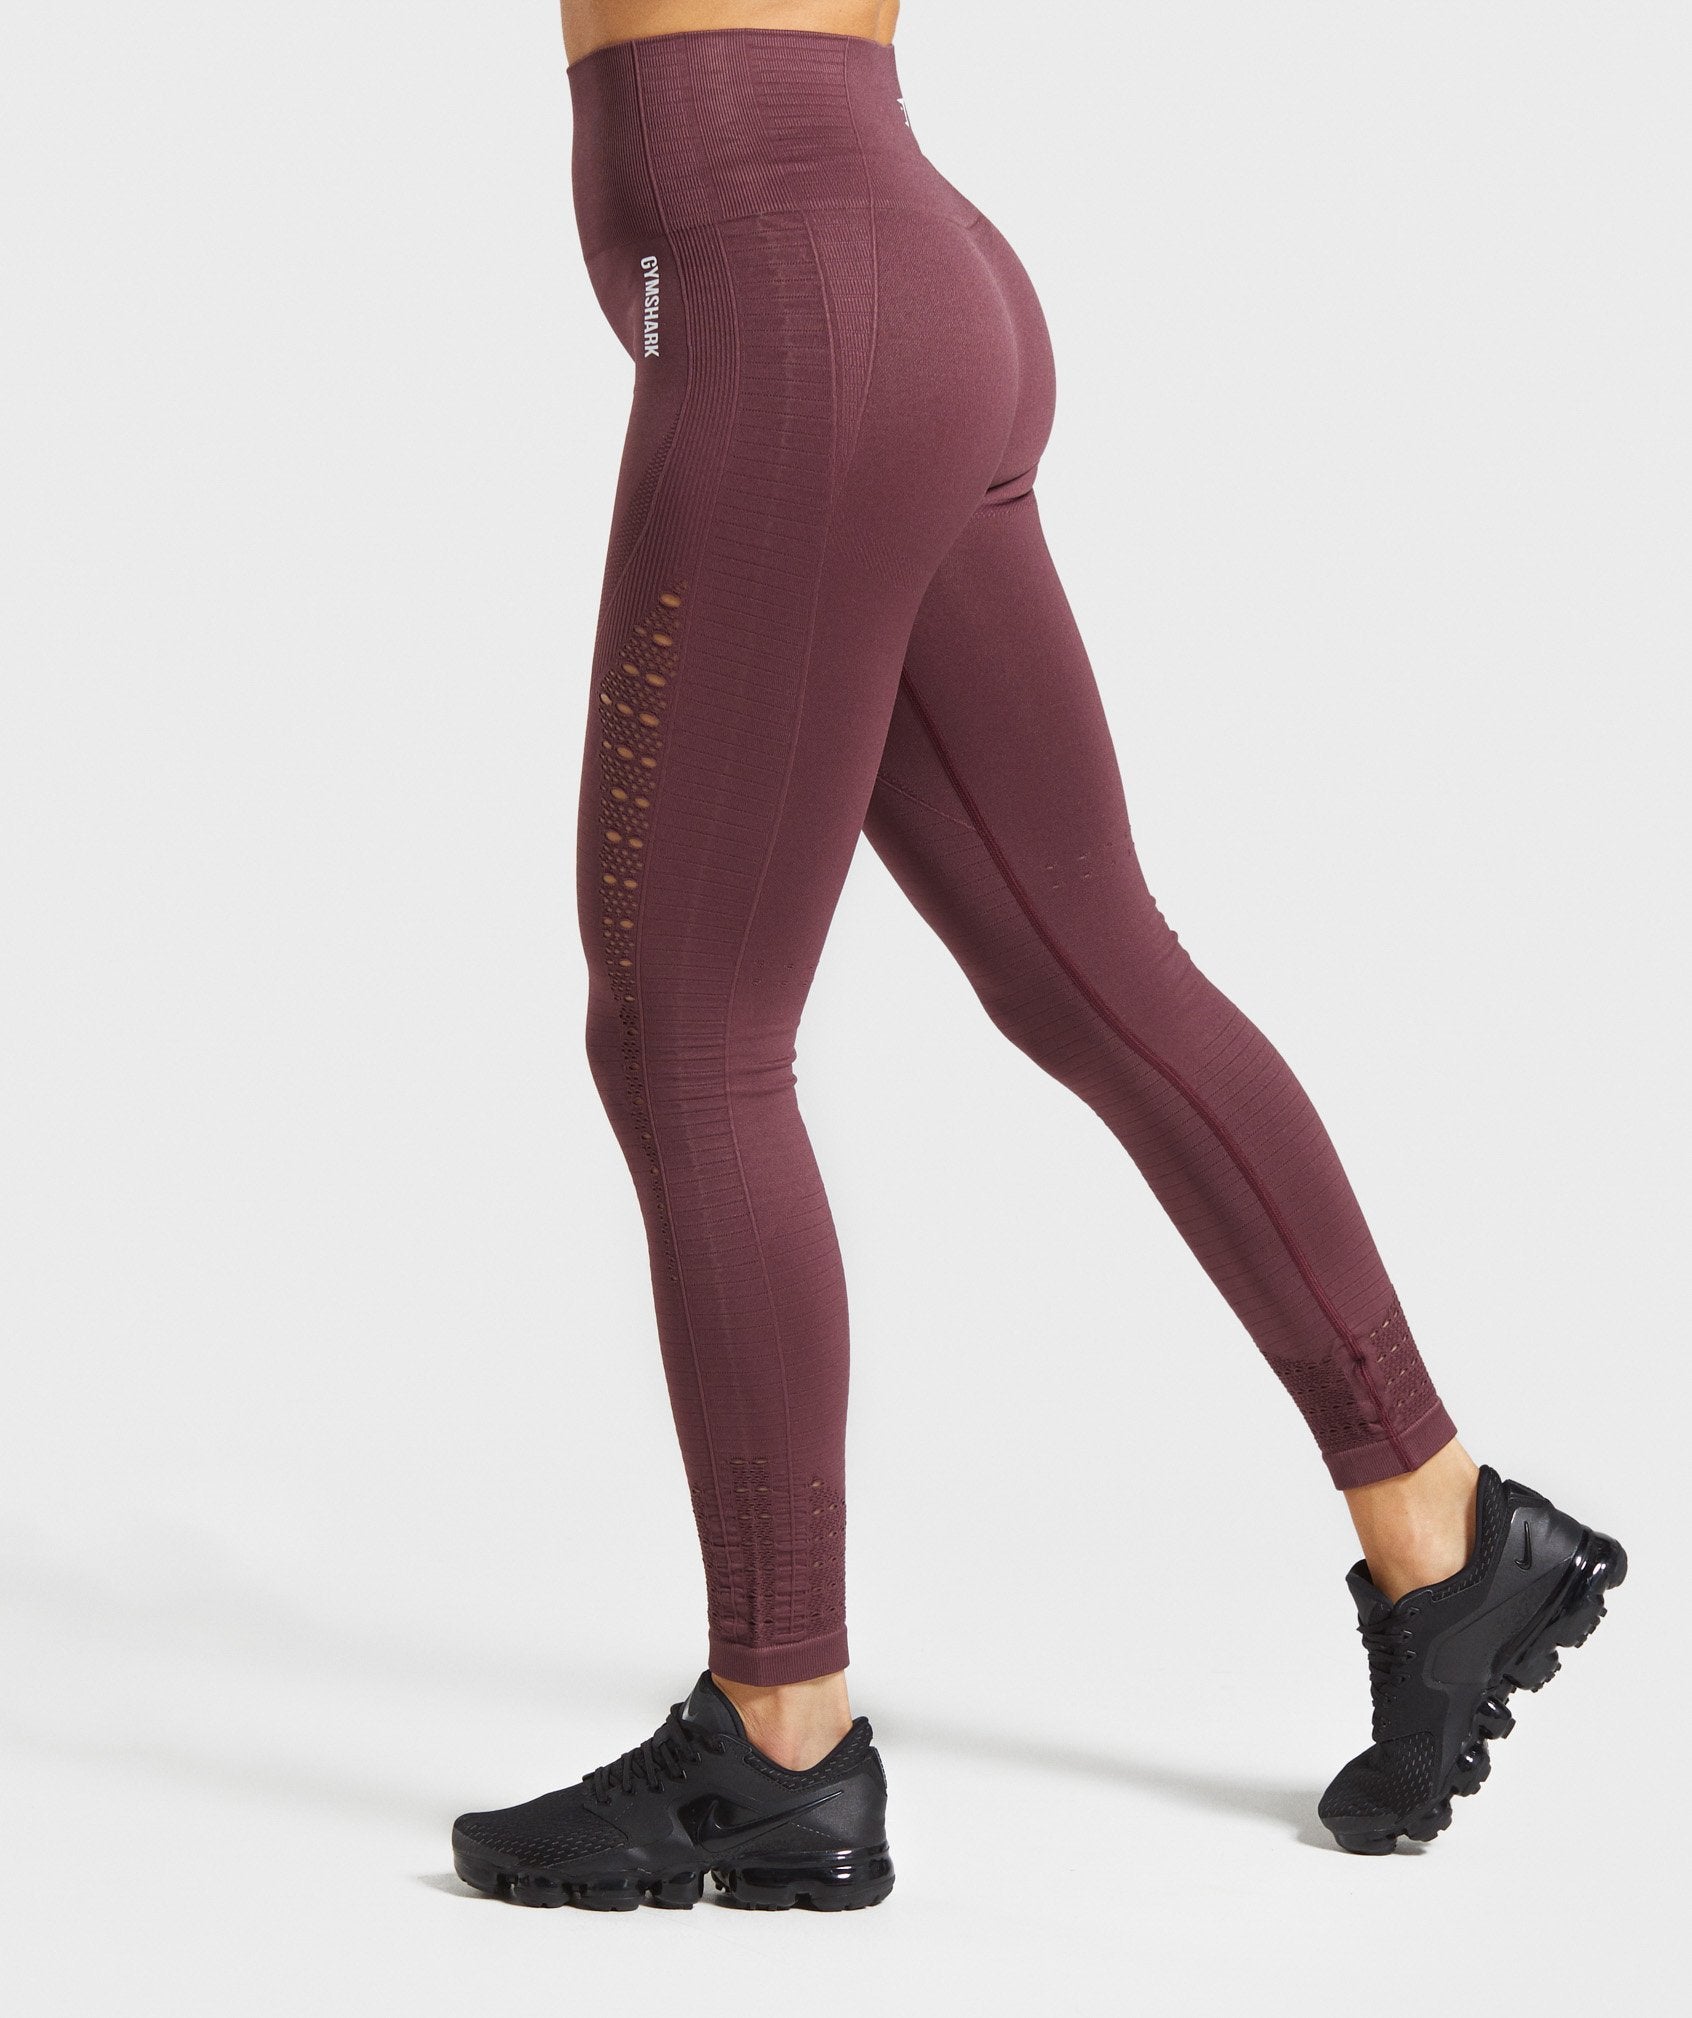 Energy+ Seamless Leggings in Berry Red - view 3